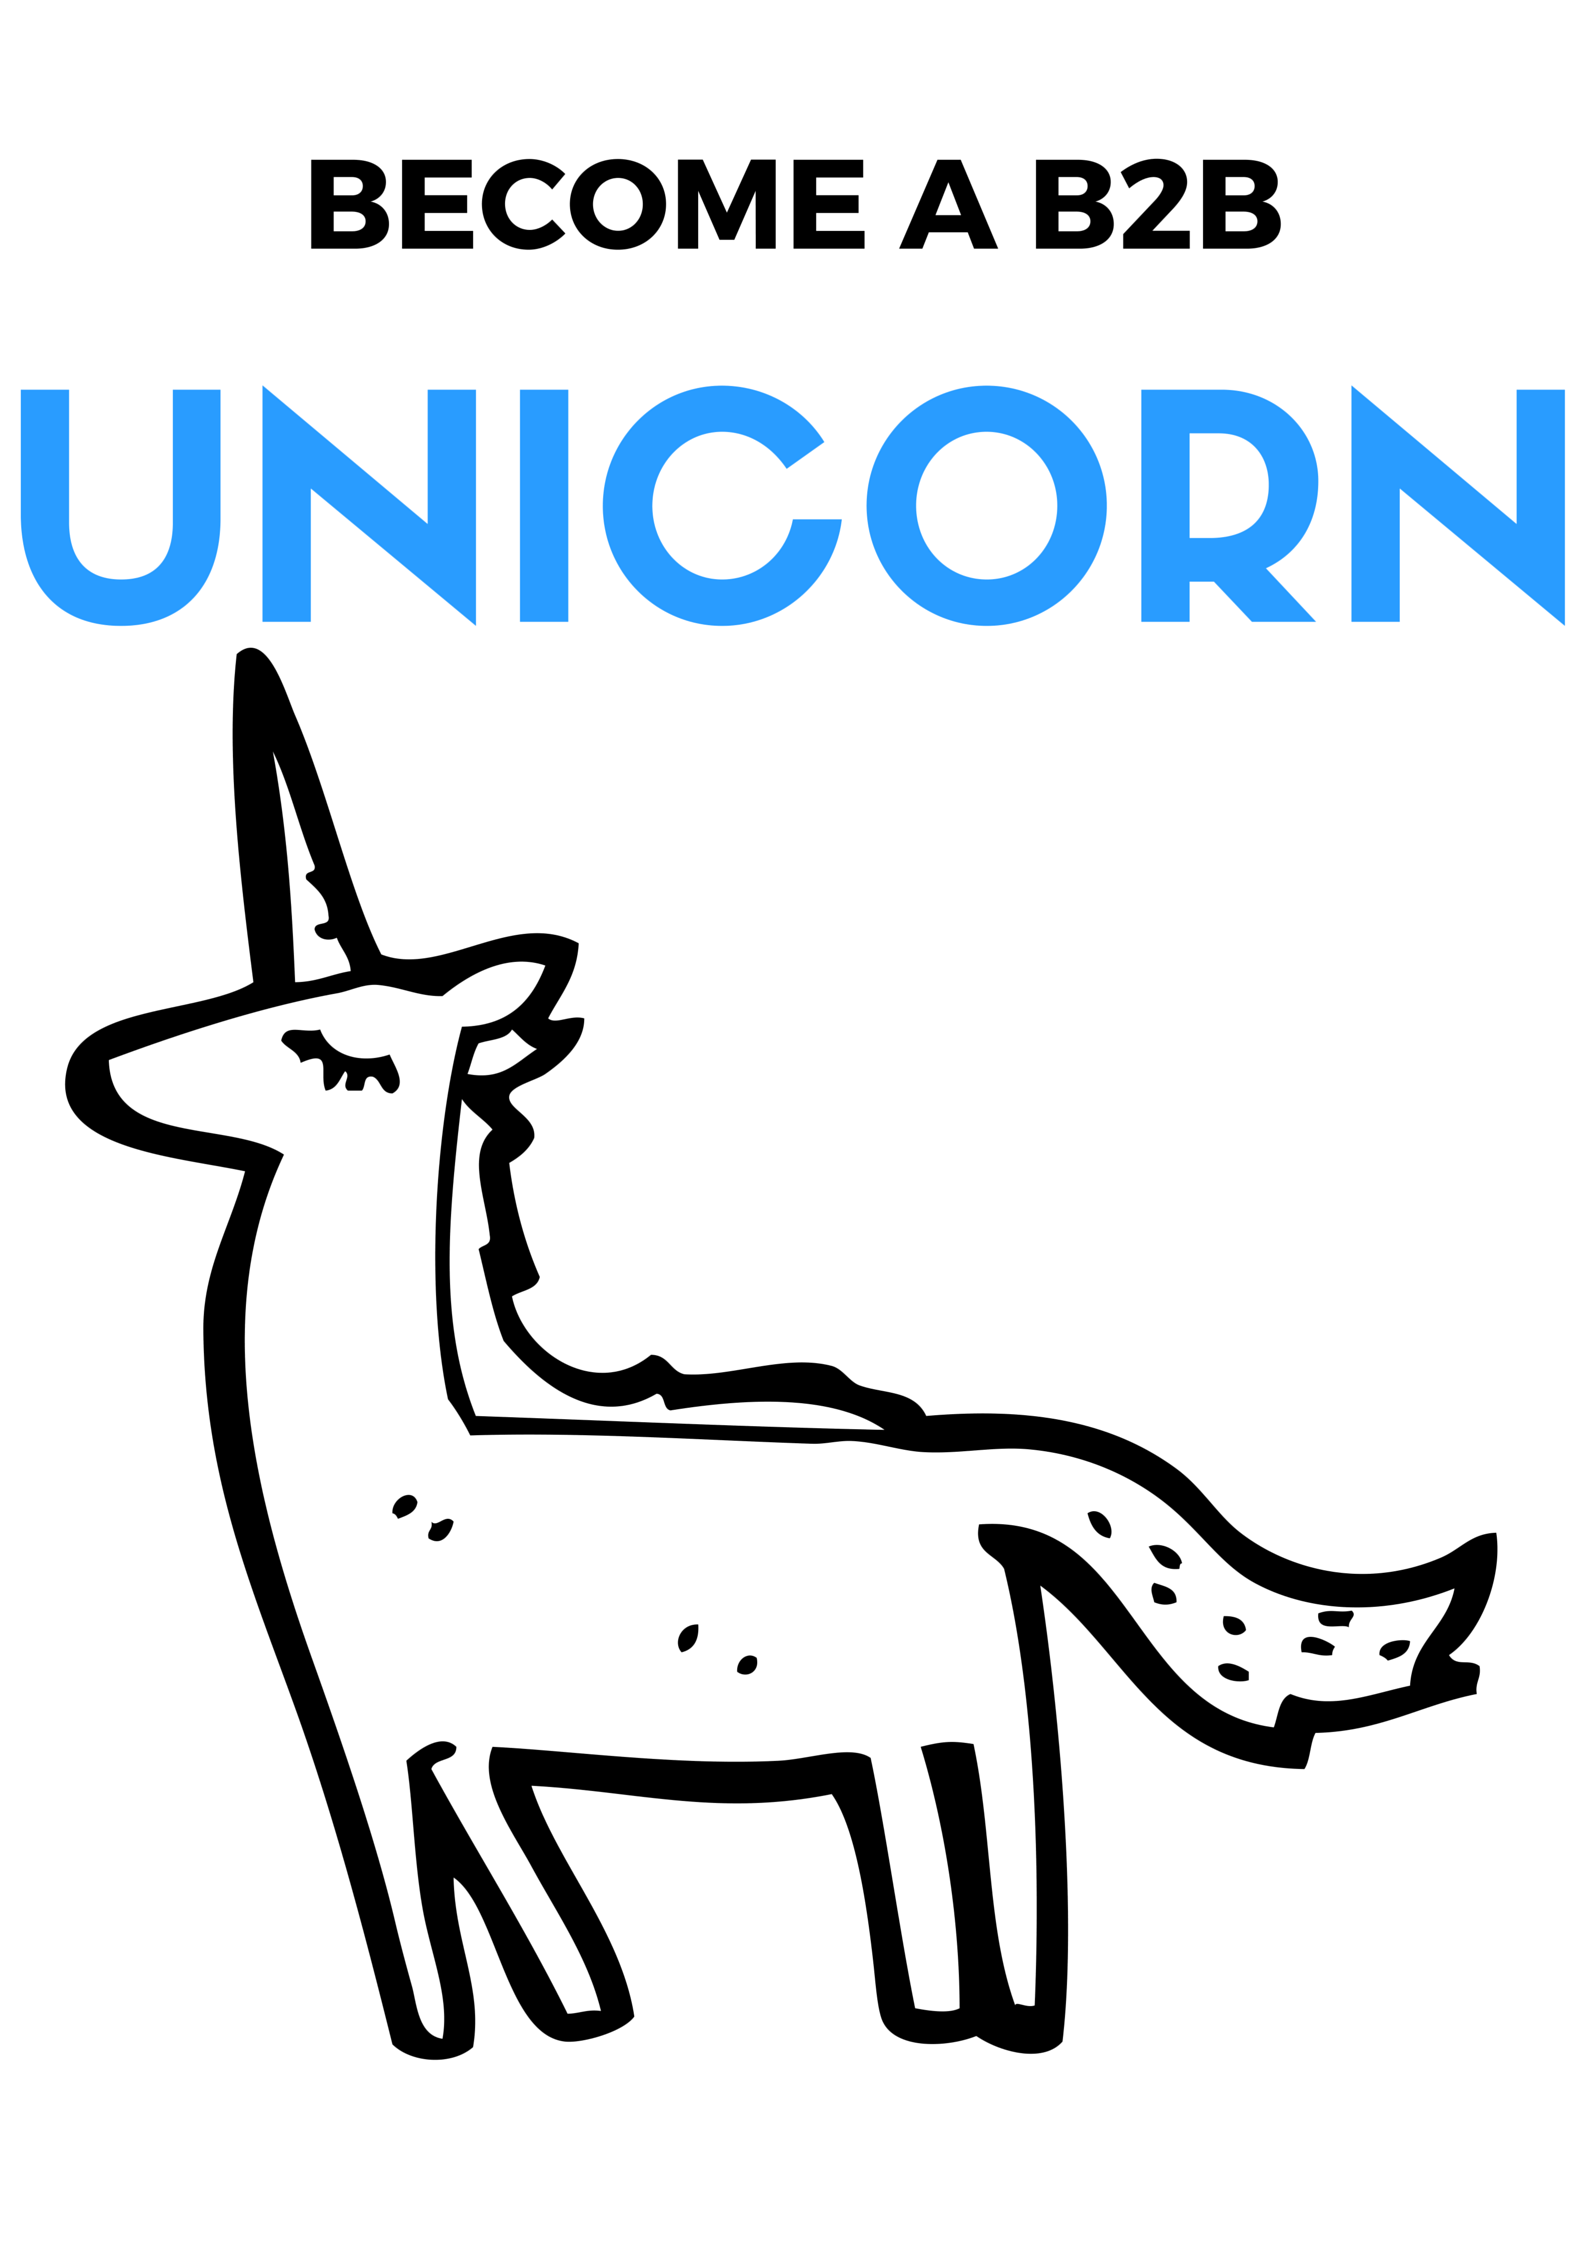 How to Turn Your B2B Business Into a Unicorn